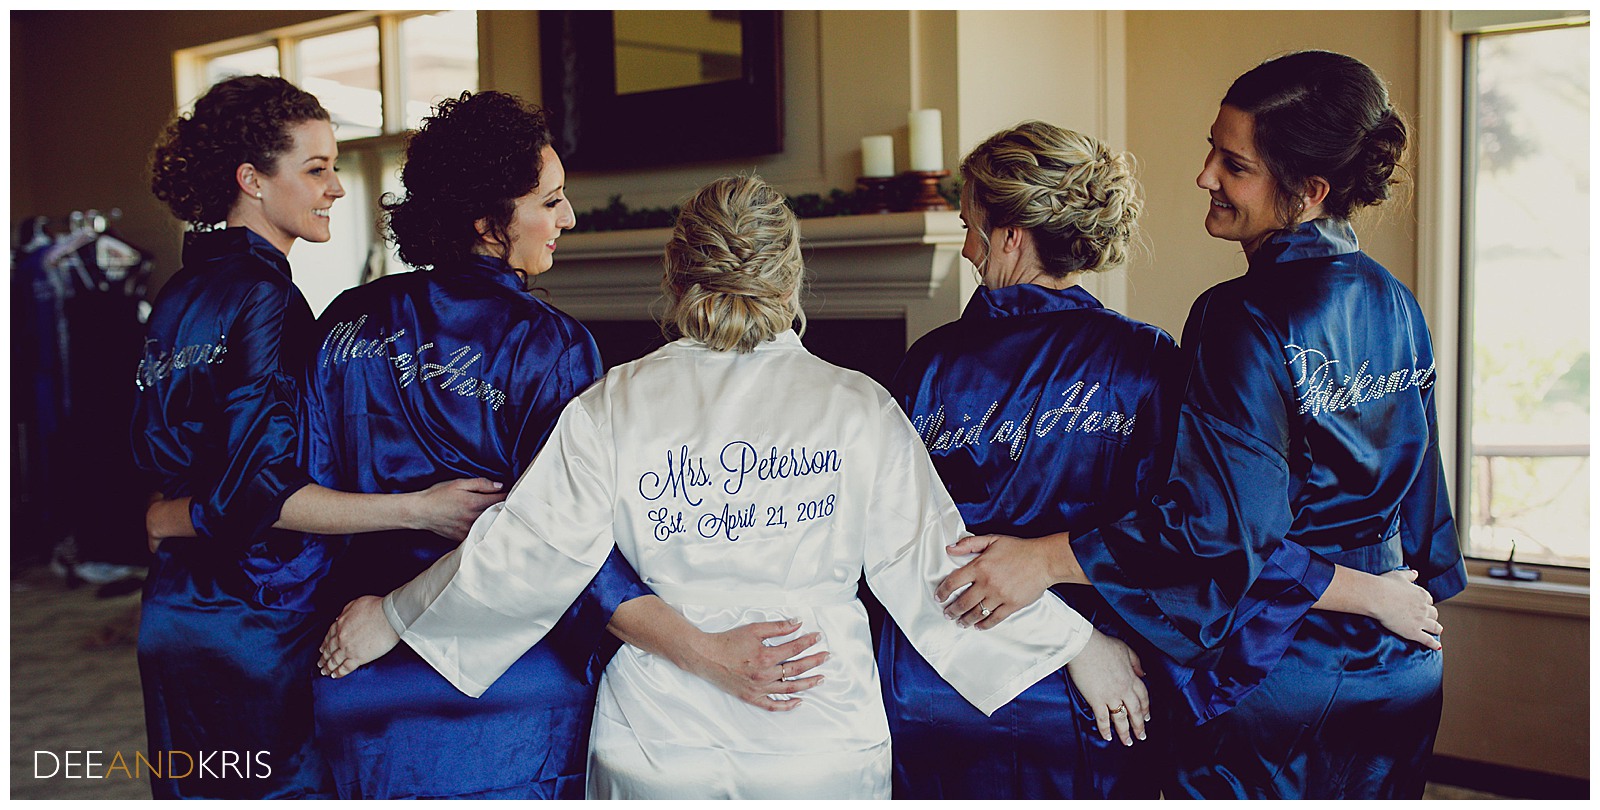 Custom bridesmaid robes, royal blue bridesmaid robes and outfits for getting ready, bride custom embroidered with name and wedding date, catta verdera wedding